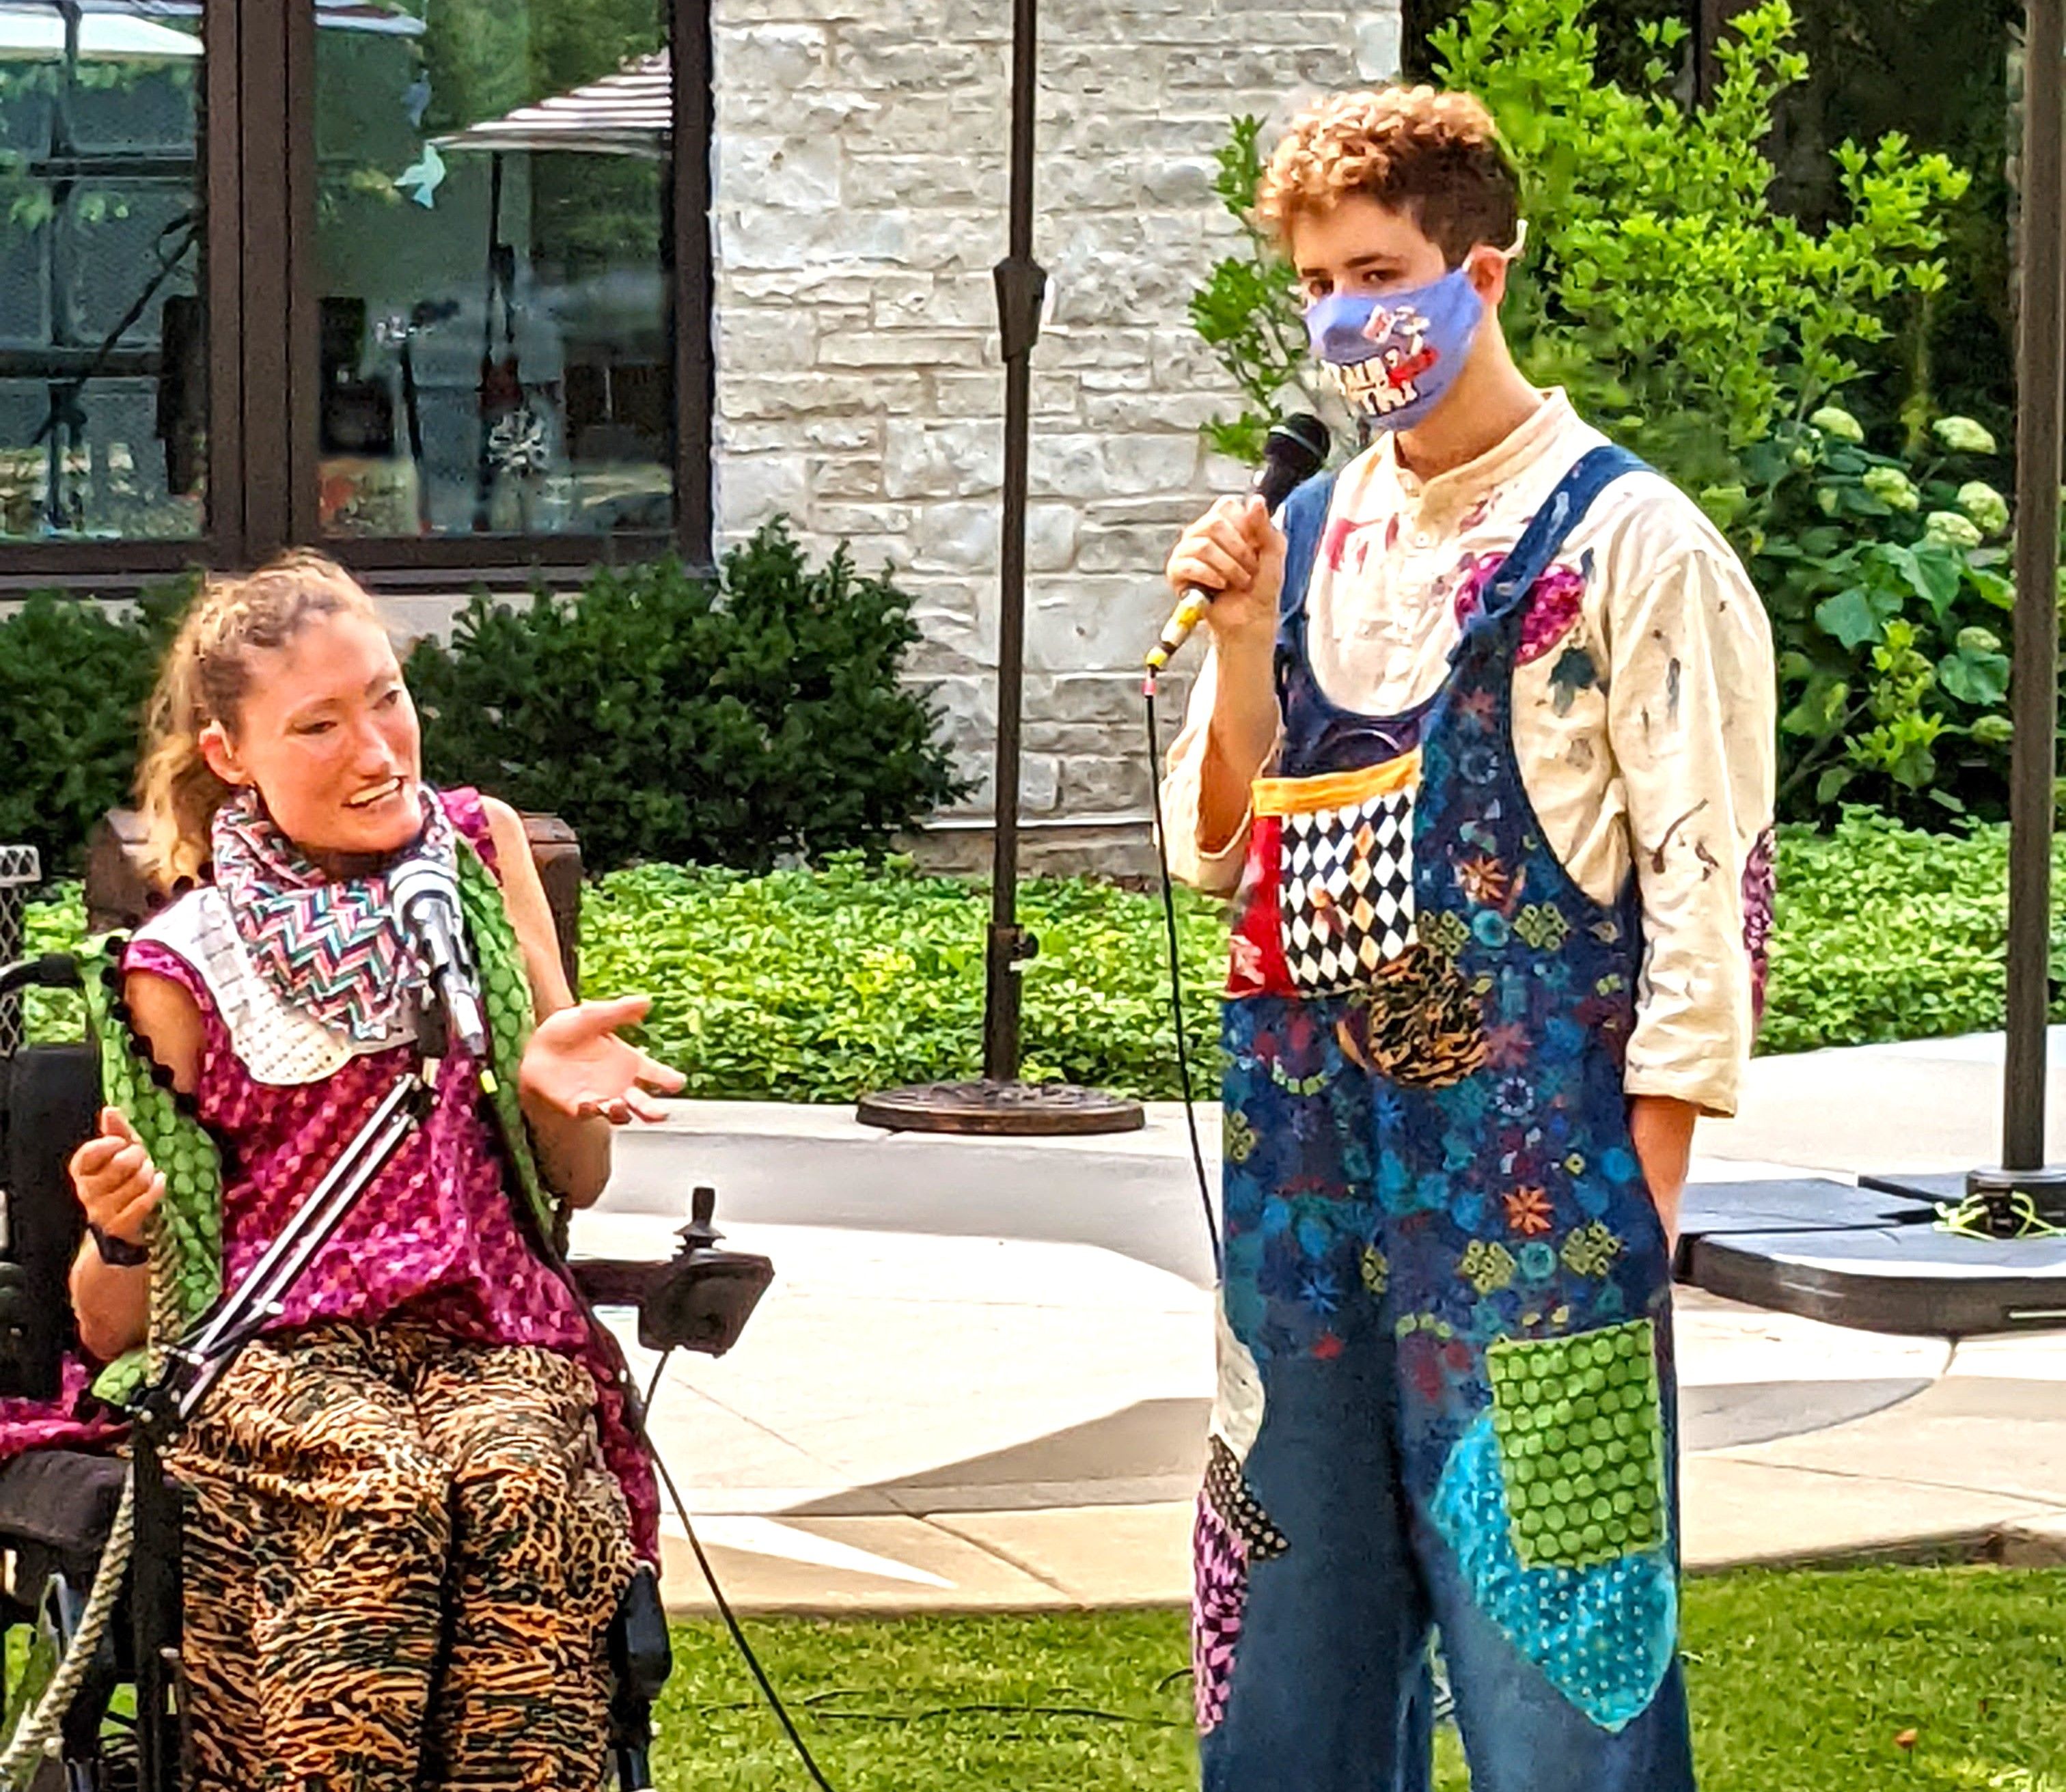 Two performers, one seated in a wheelchair, the other standing with a microphone wearing a facemask and colorful overalls